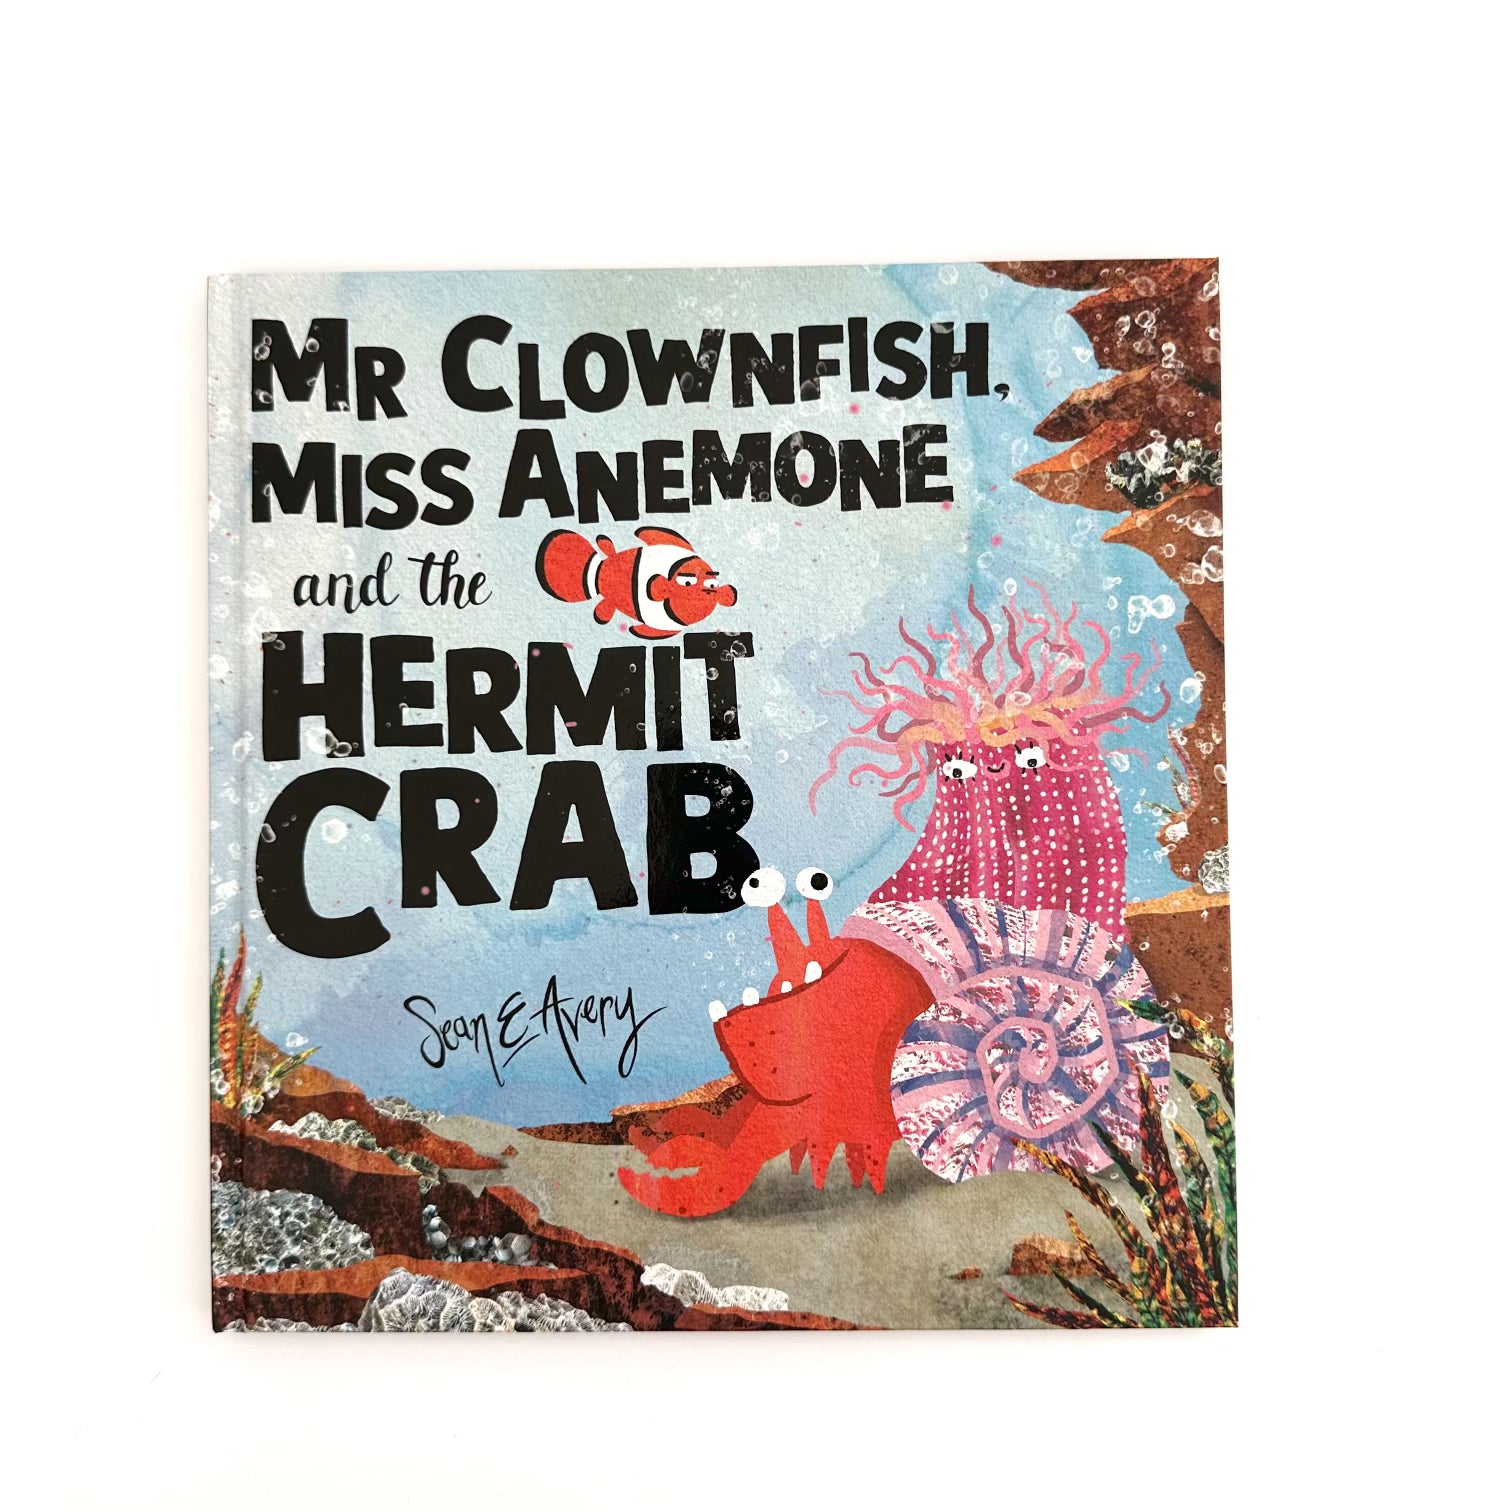 MR CLOWNFISH, MISS ANEMONE AND THE HERMIT CRAB